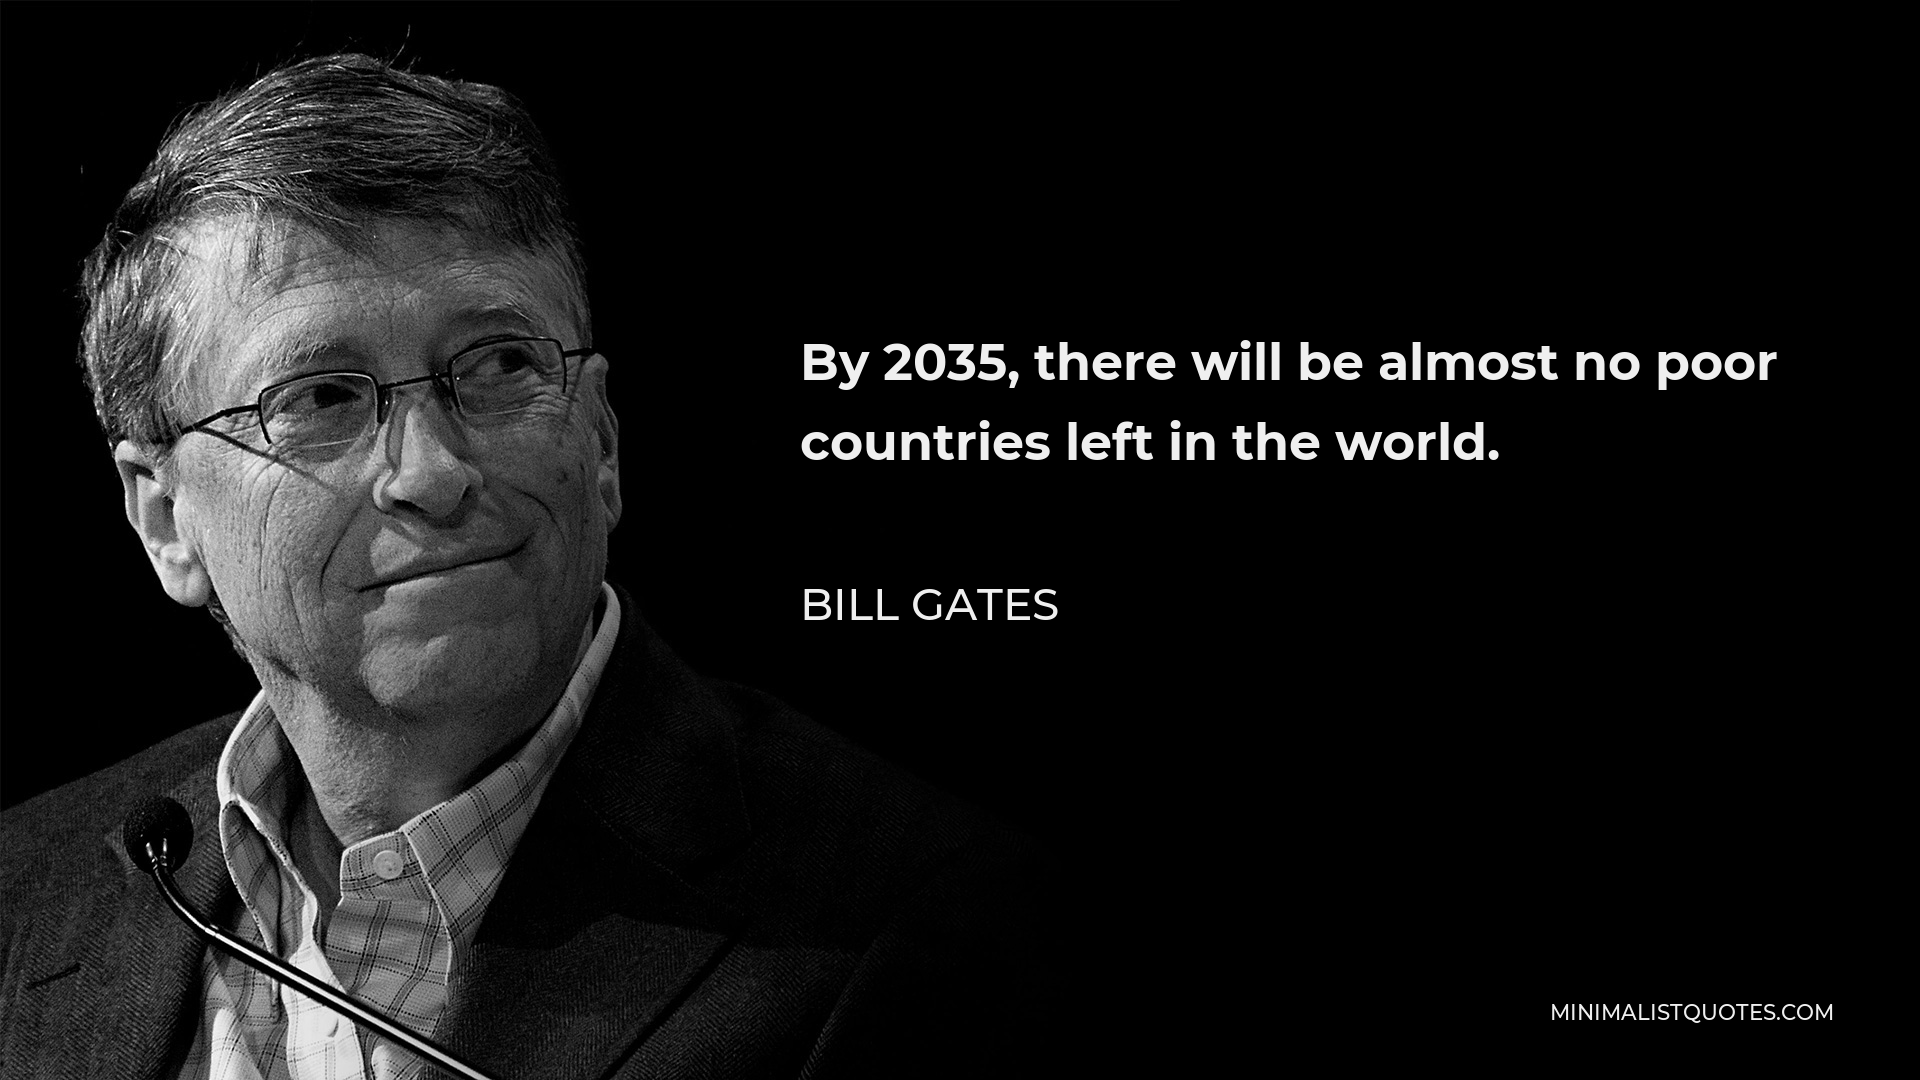 Bill Gates Quote - By 2035, there will be almost no poor countries left in the world.